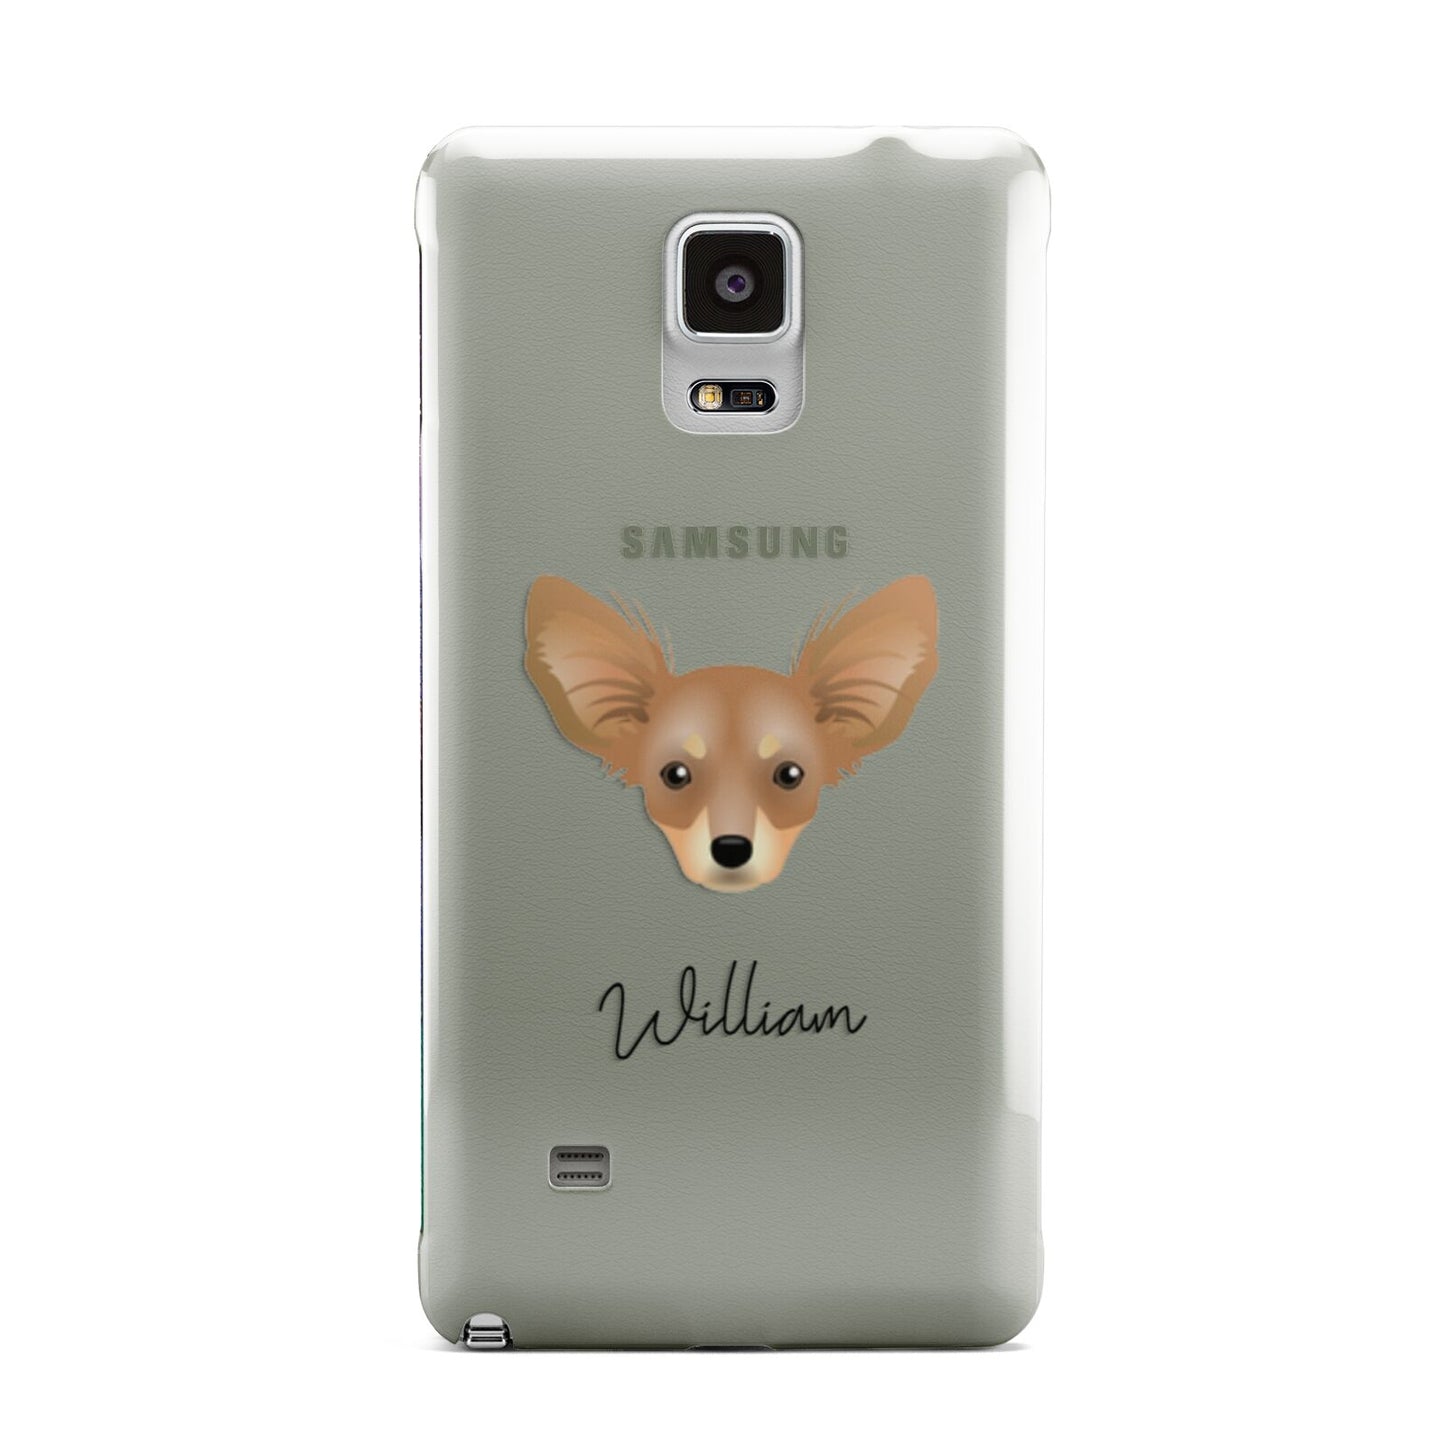 Russian Toy Personalised Samsung Galaxy Note 4 Case